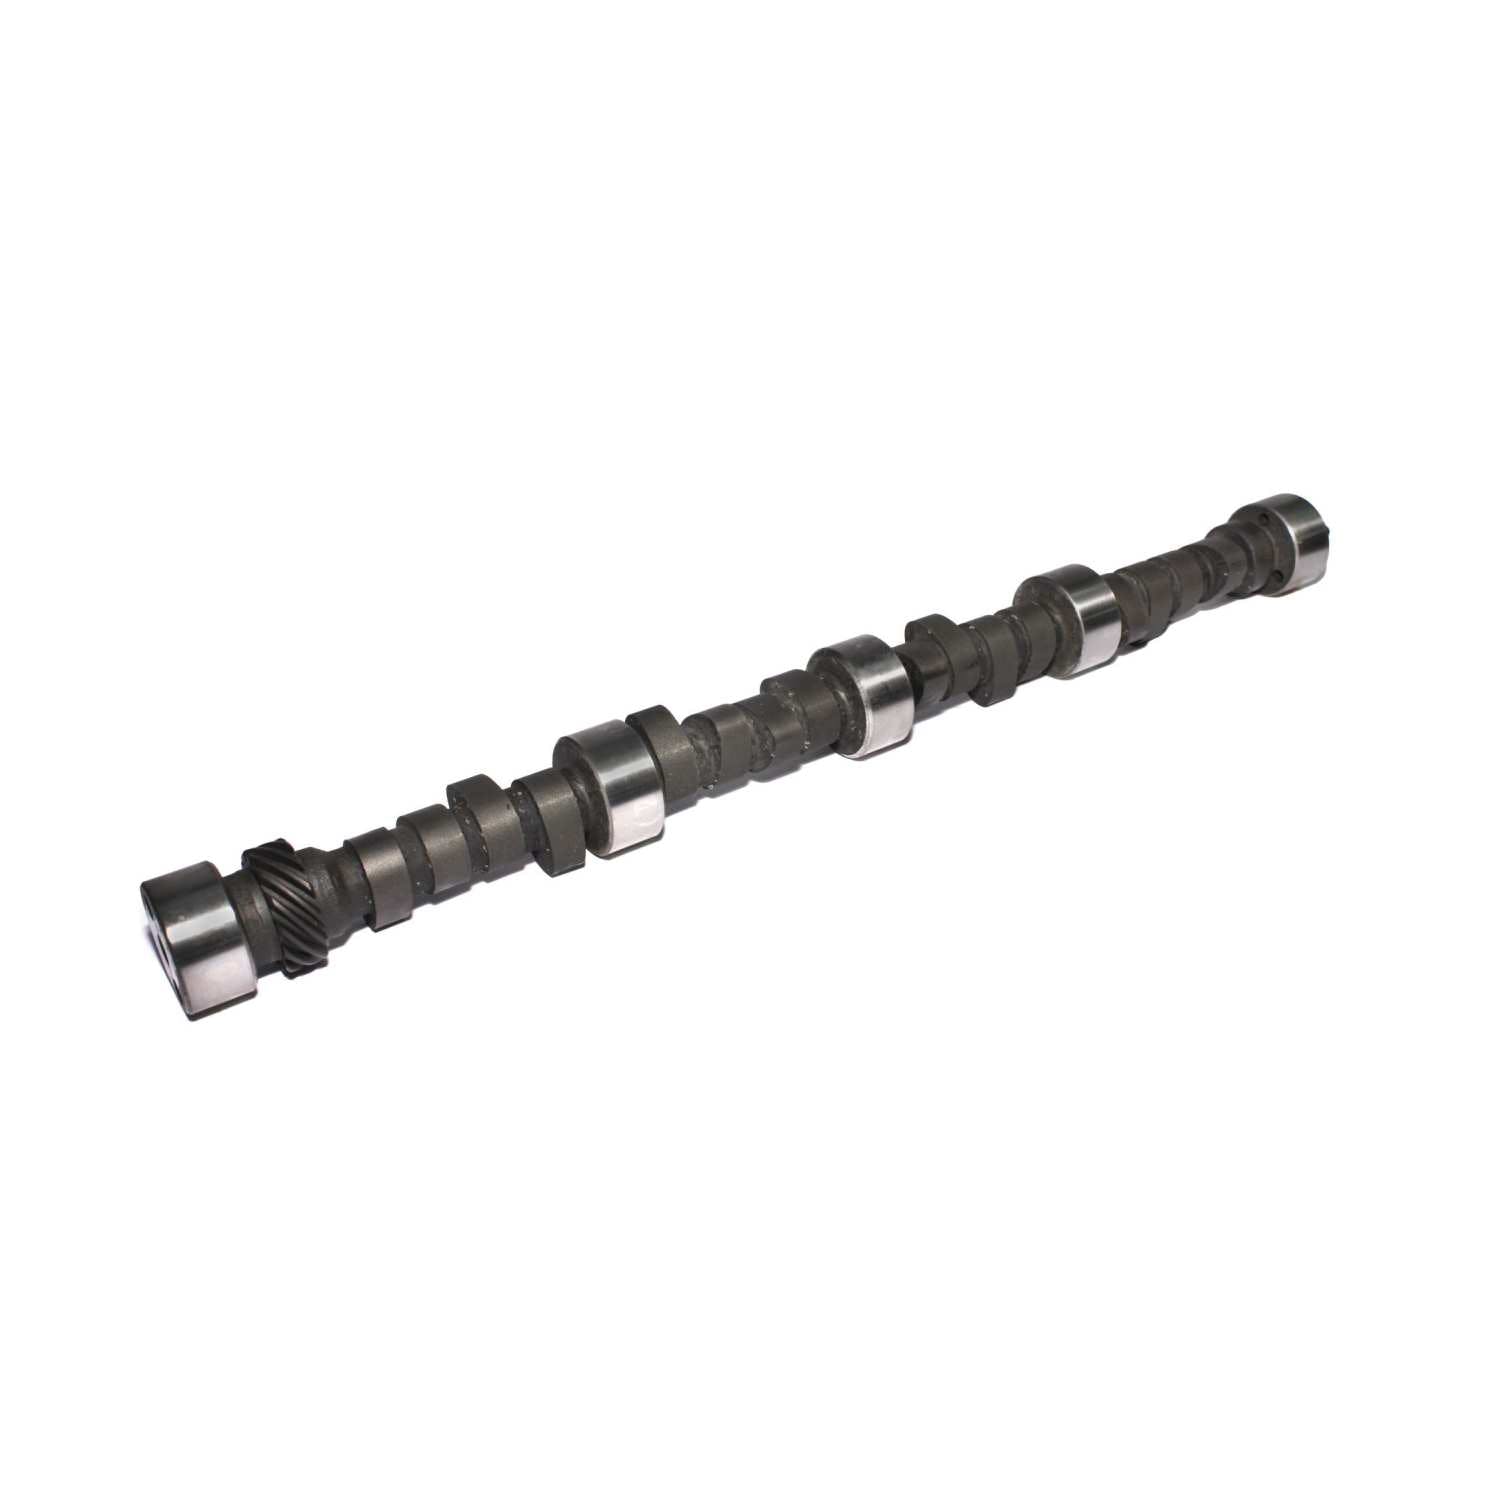 Competition Cams 11-681-47 Drag Race 4/7 Swap Firing Order Camshaft